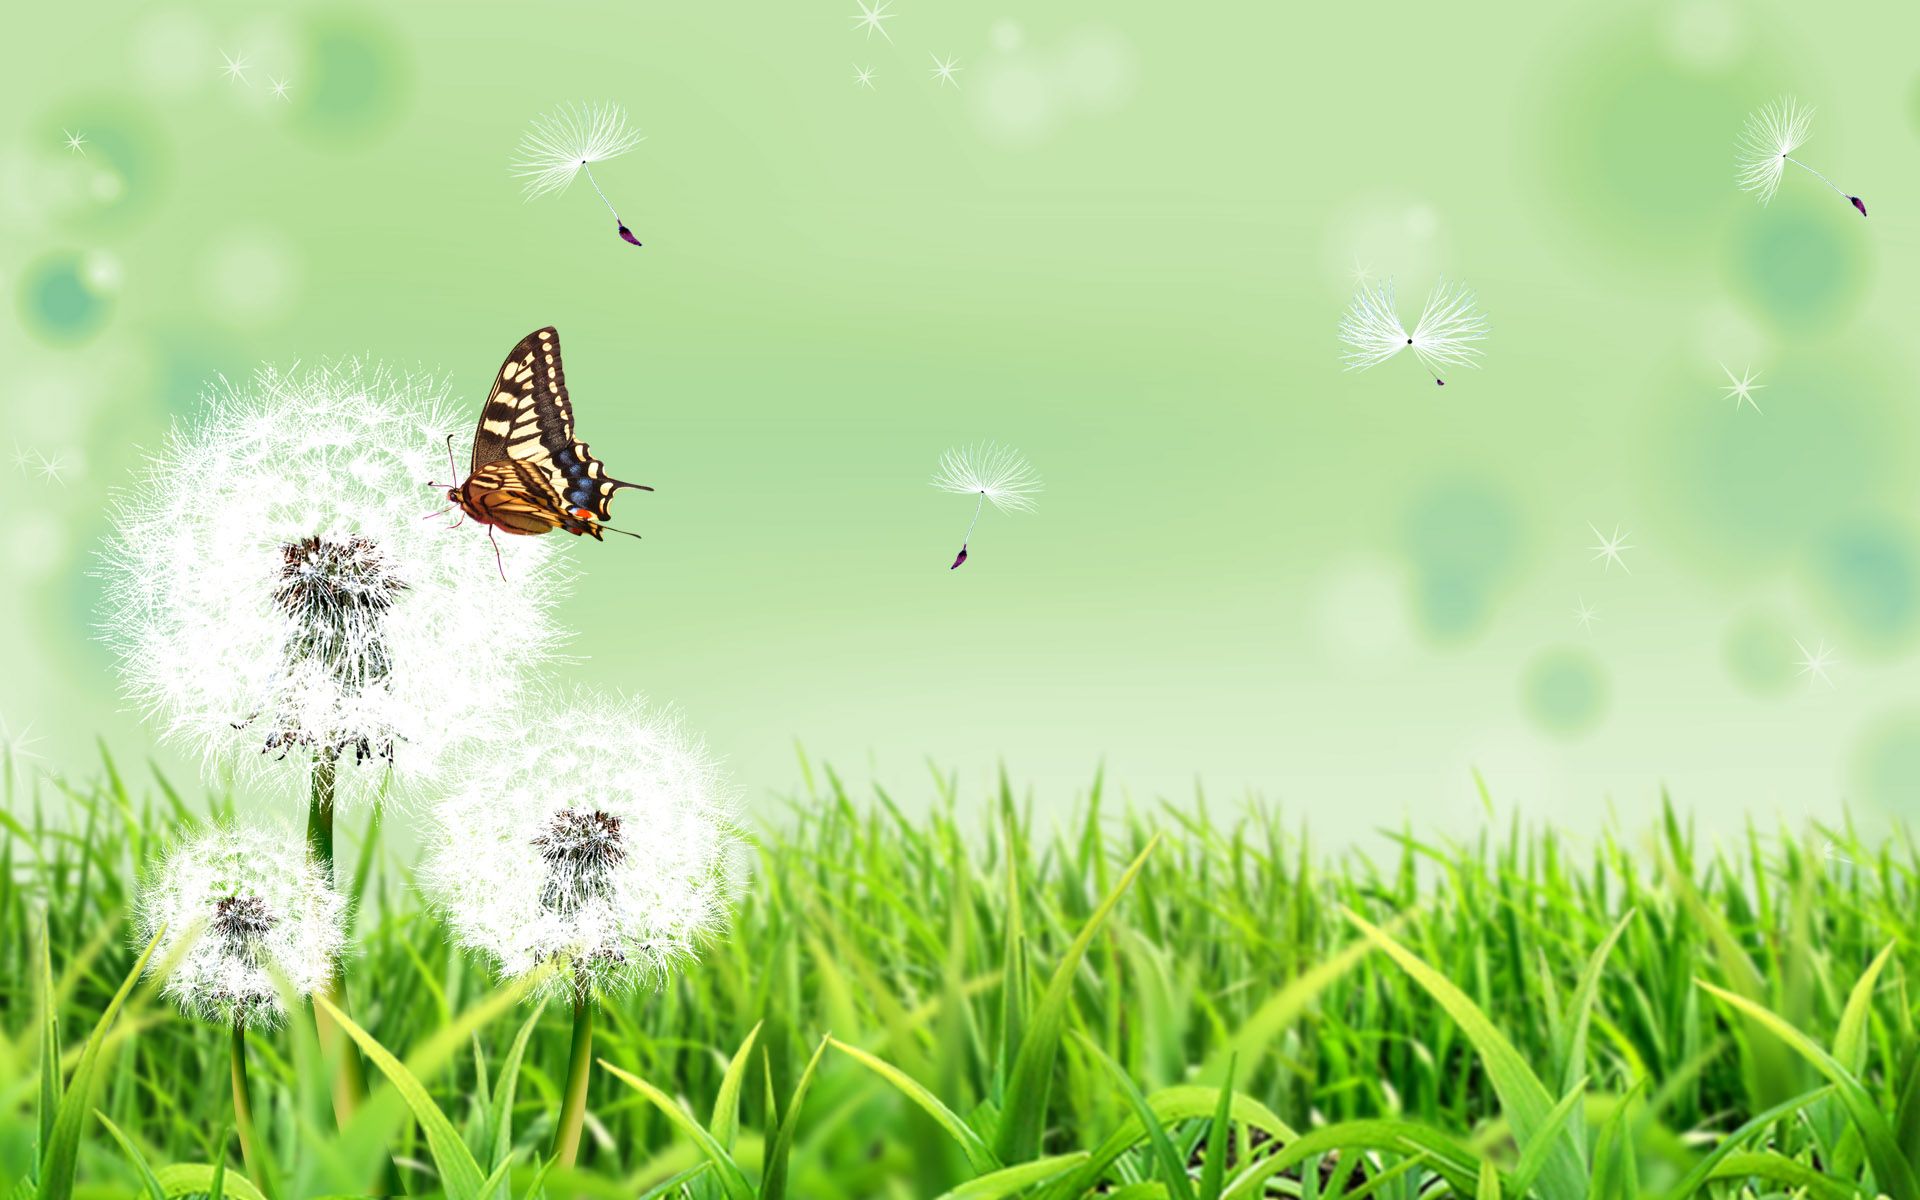 Free download Scenery Wallpaper Includes Dandelion and Butterfly Doing Good [1920x1200] for your Desktop, Mobile & Tablet. Explore Wallpaper Good for Eyes. Wallpaper Good for Eyes, Eyes Wallpaper for